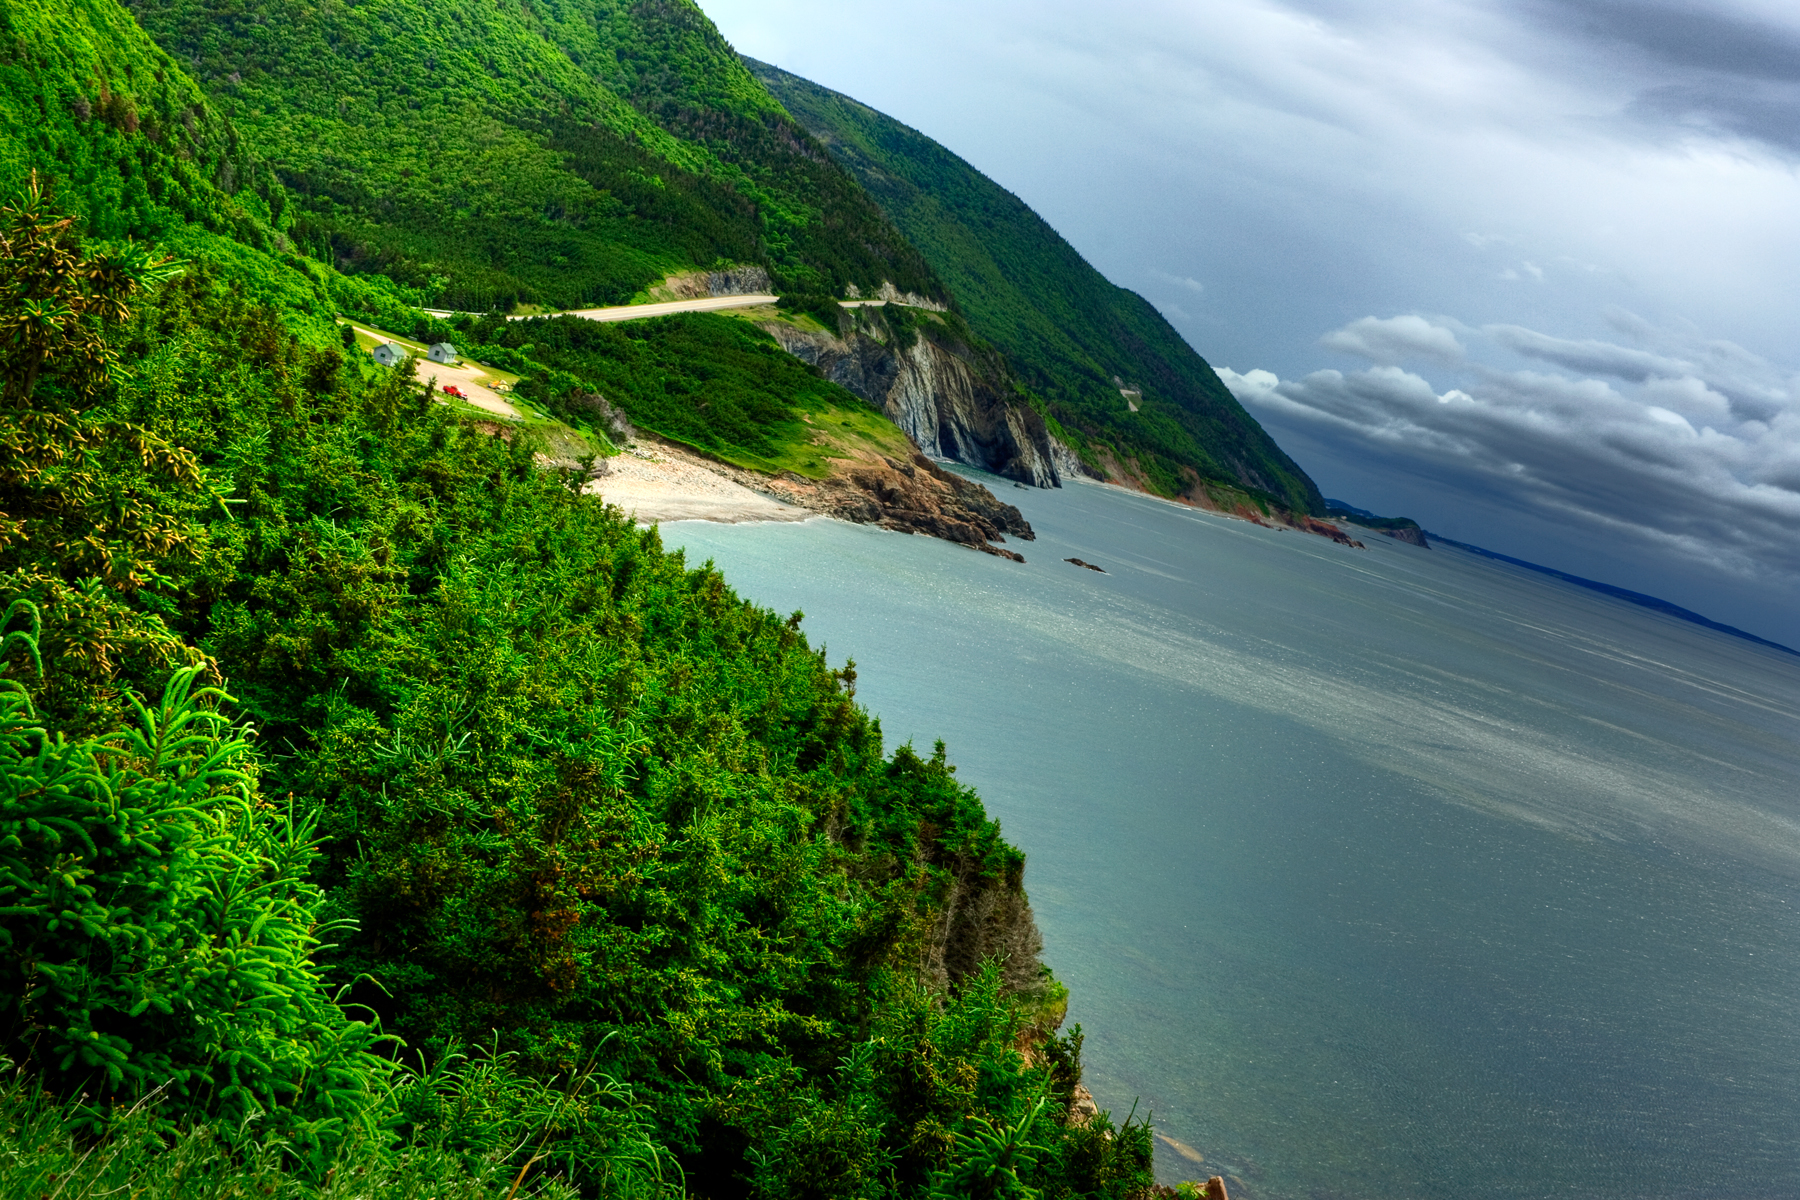 Cabot trail scenery - hdr photo